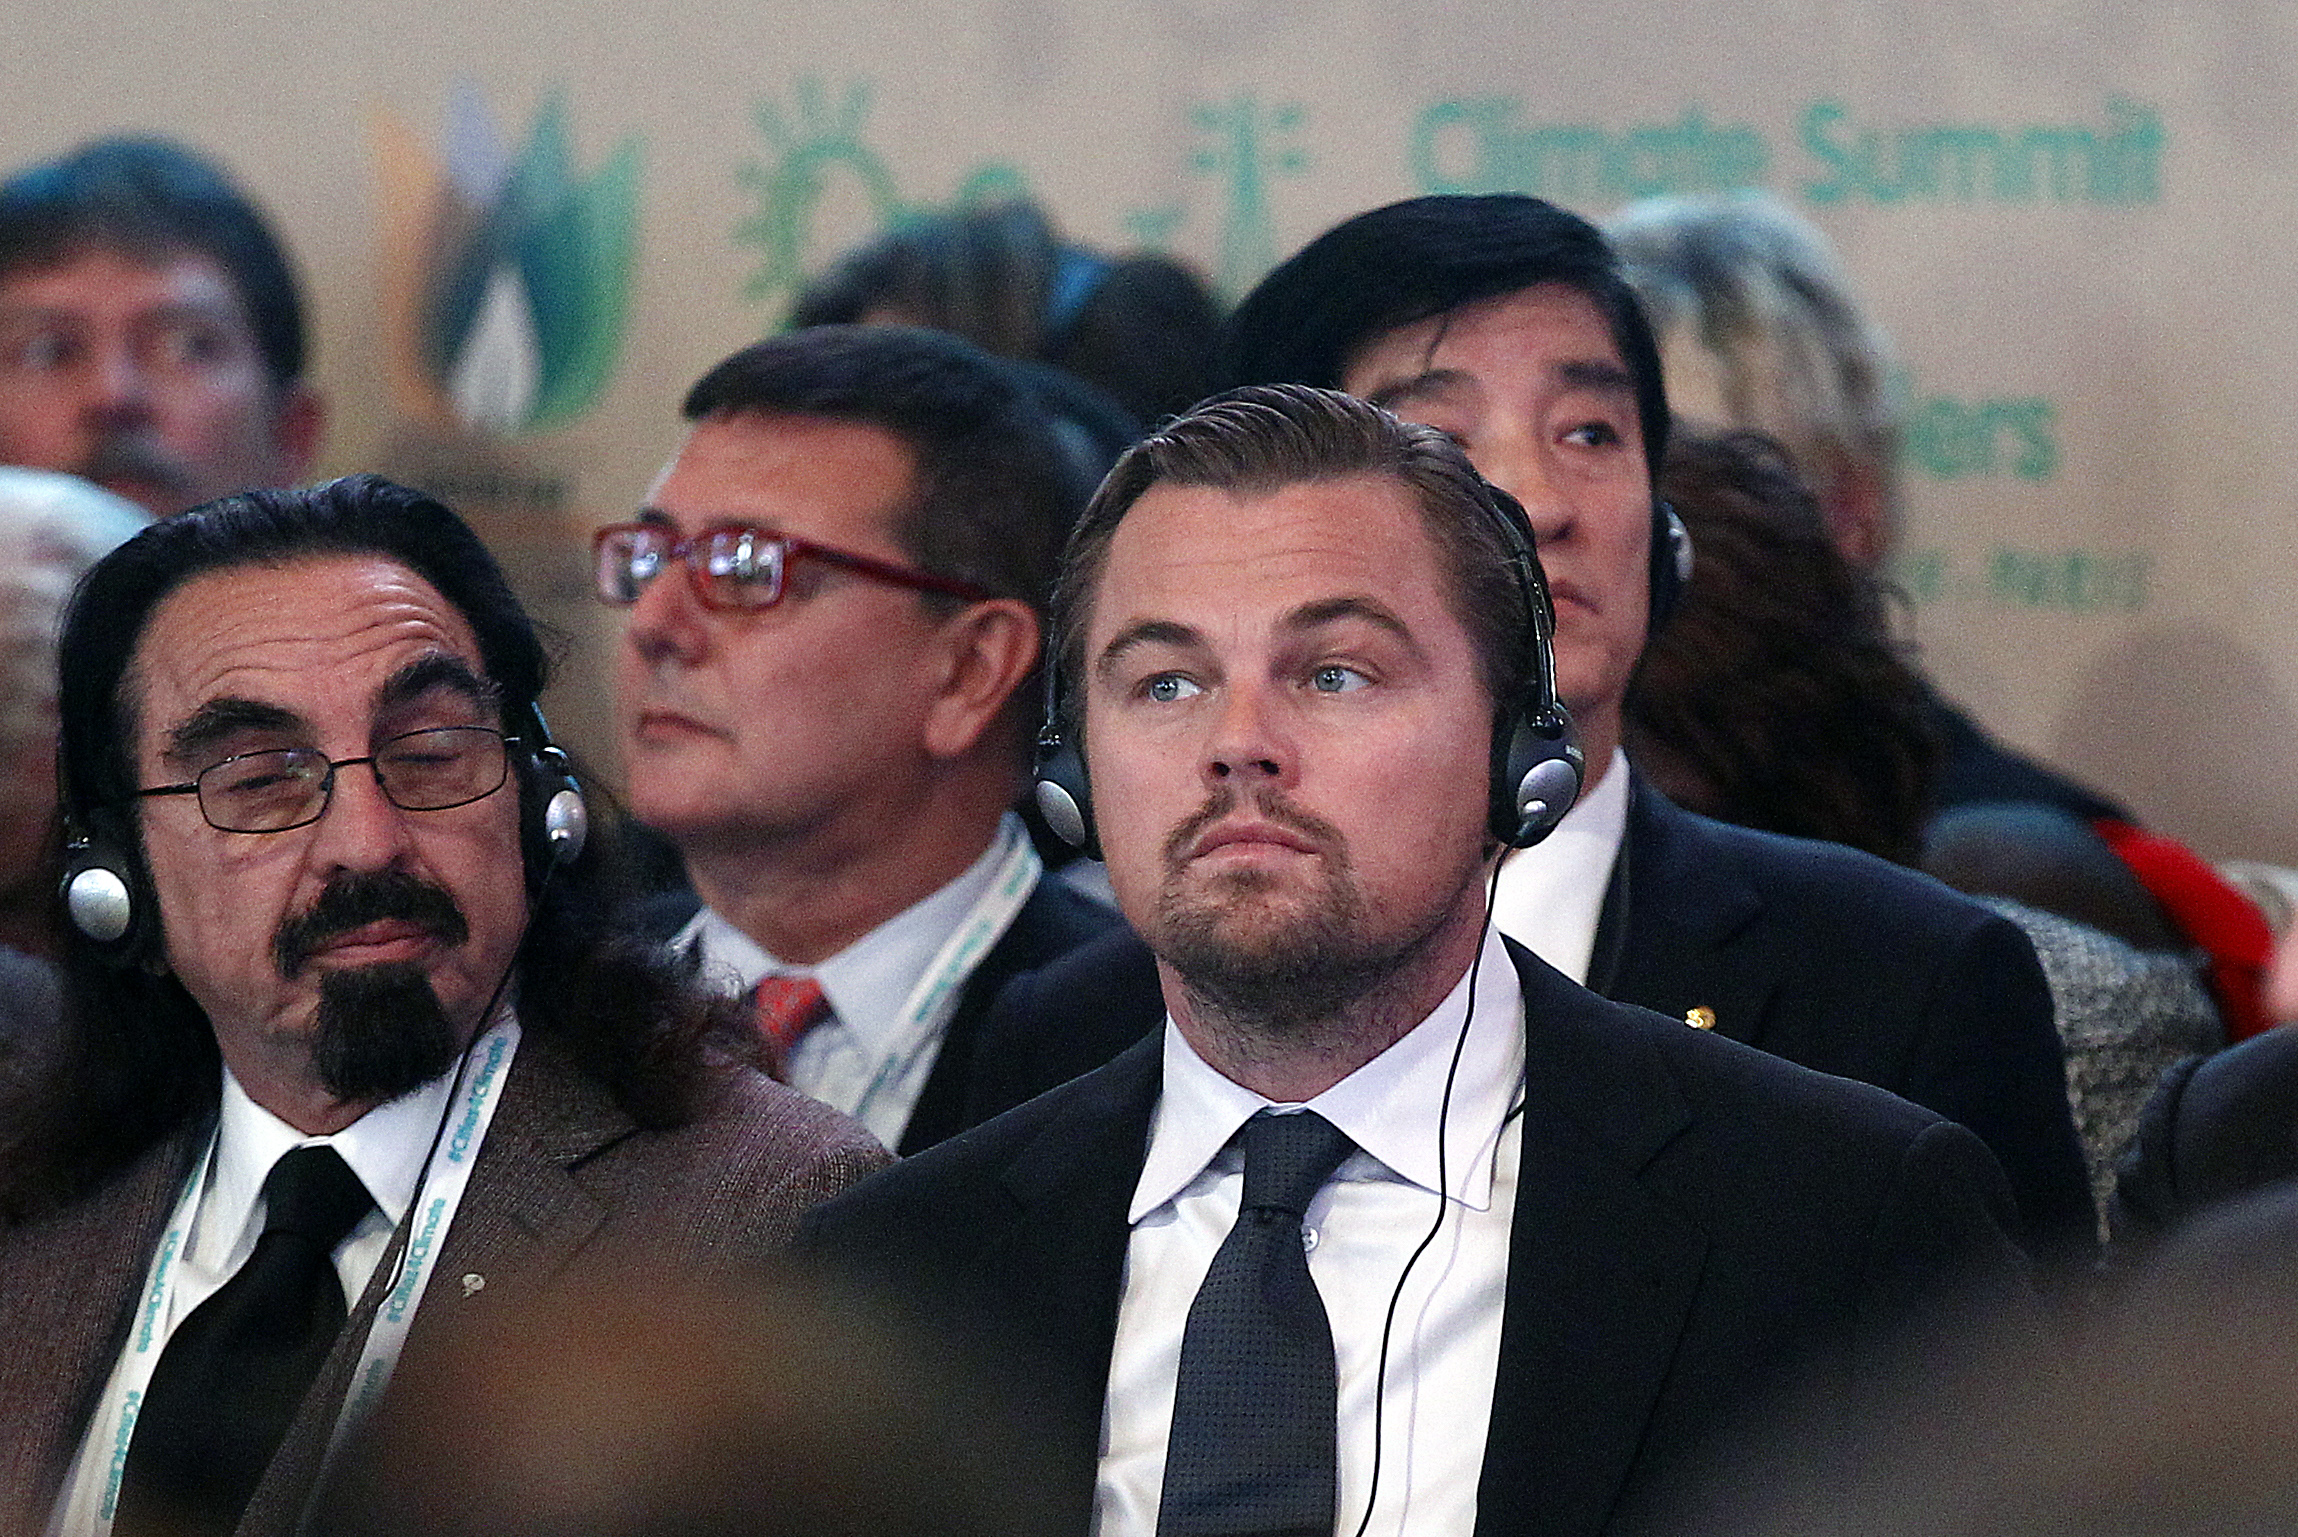 Leonardo DiCaprio and his father George DiCaprio attend a conference on climate change on December 4, 2015 in Paris, France | Source: Getty Images